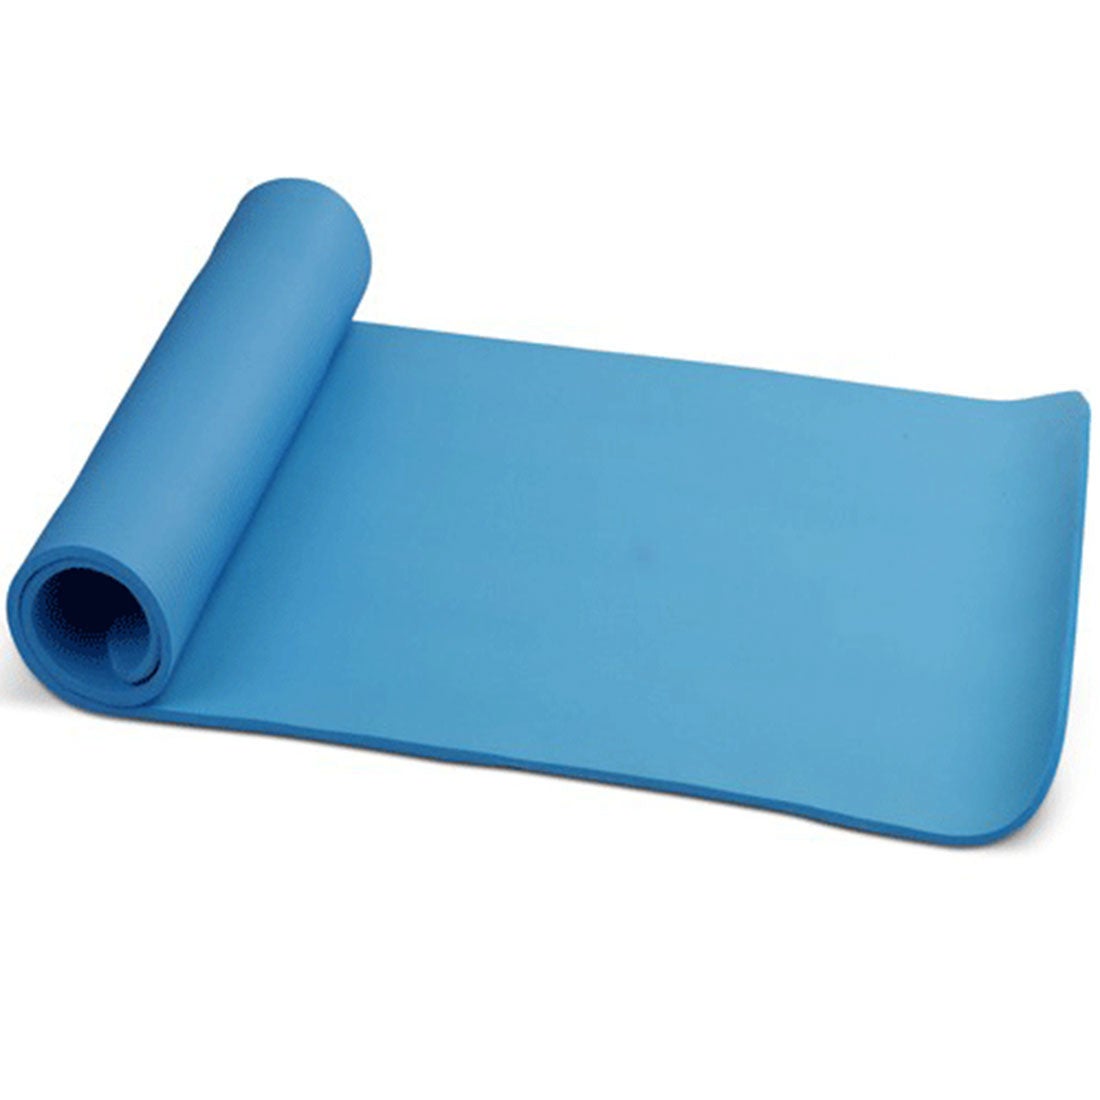 10mm Extra Thick NBR Yoga Mat Gym Pilates Fitness Exercise - blue | Buy ...